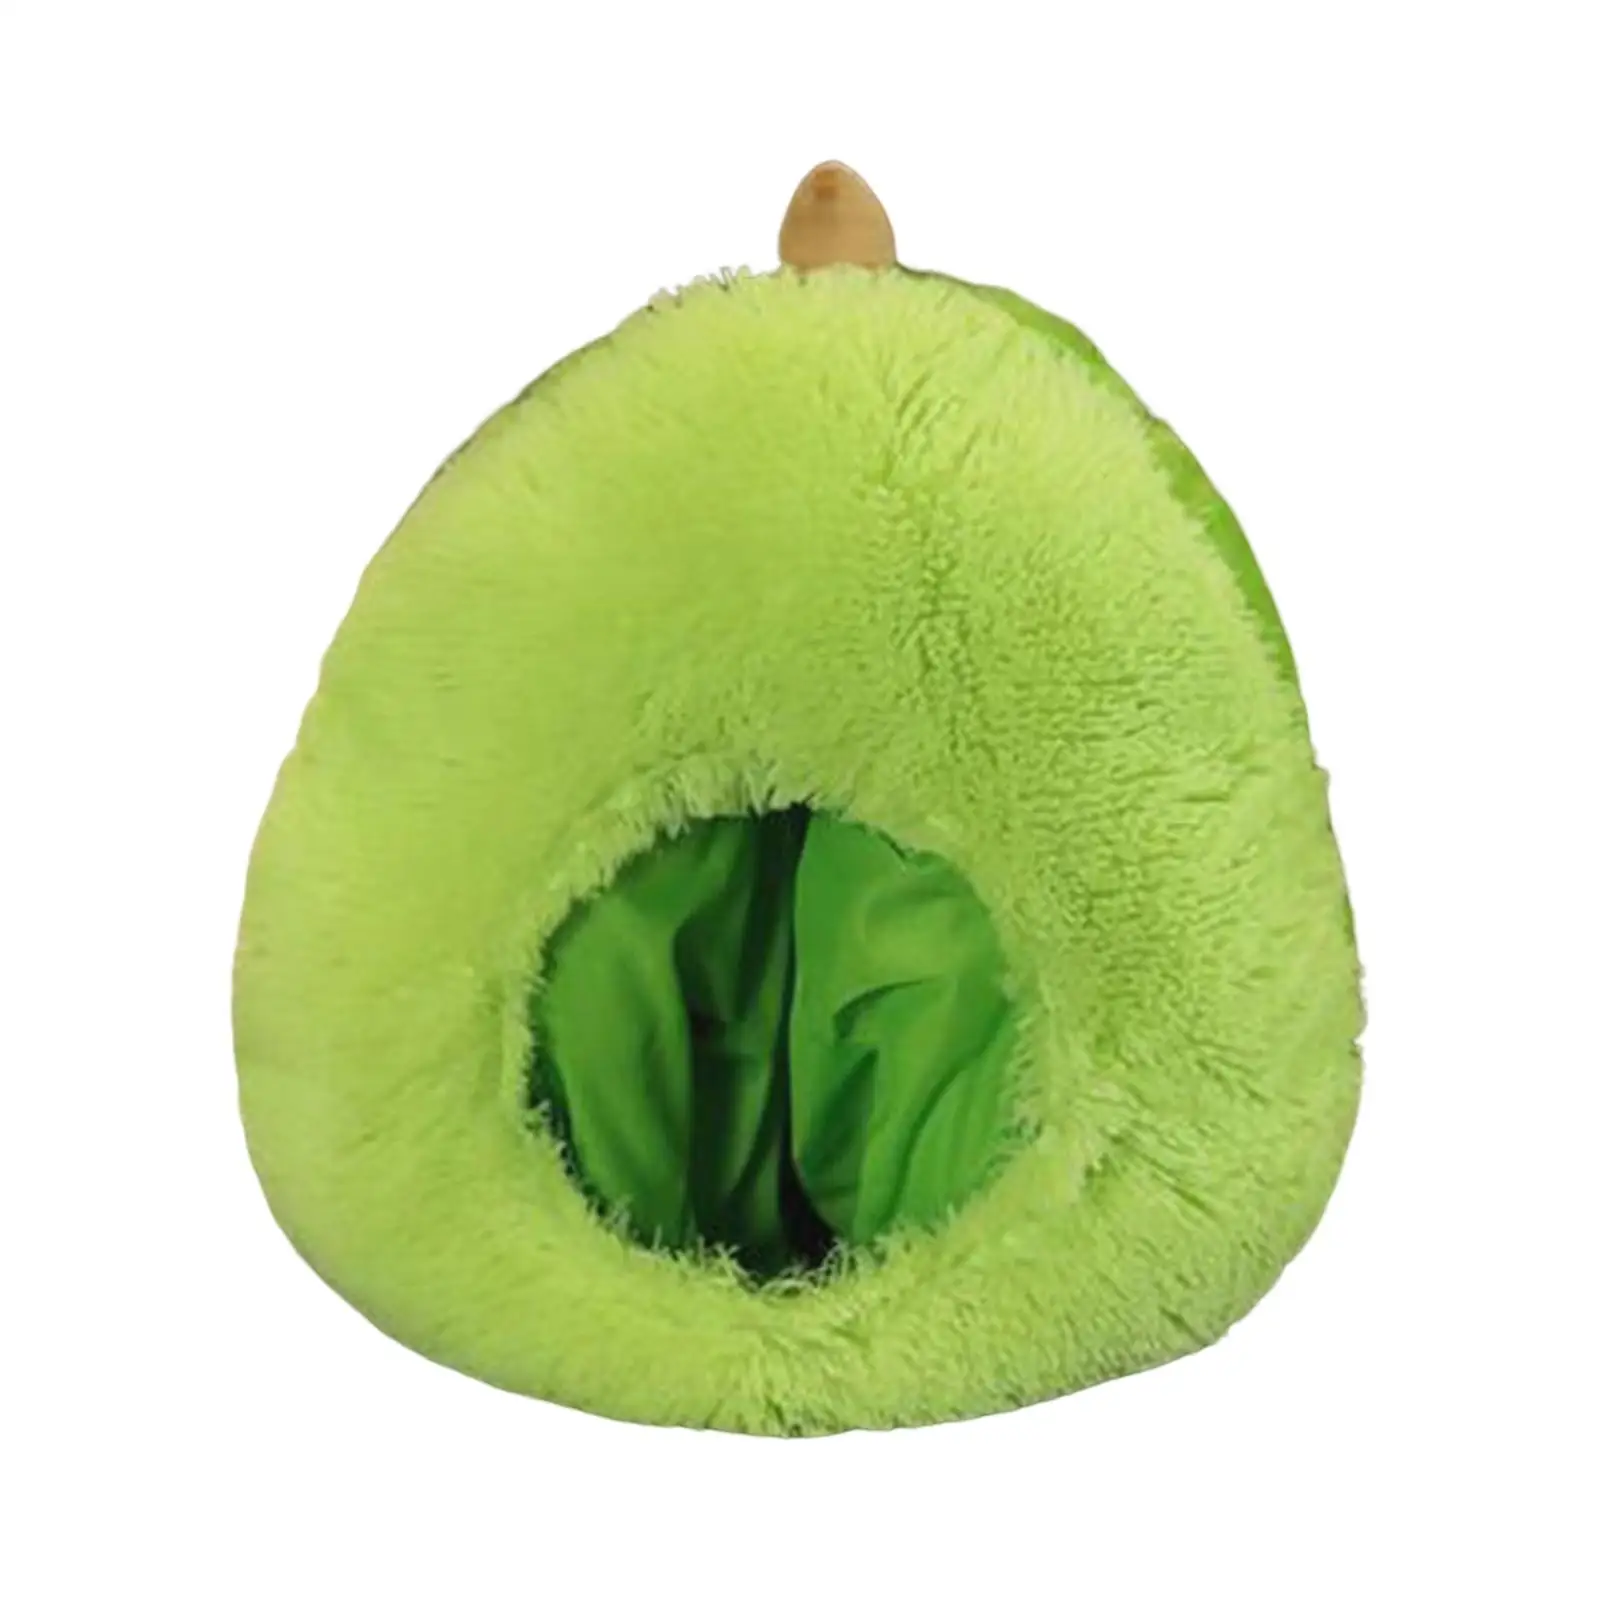 Plush Doll Fruit Headgear Hat Photo Props Cosplay for Festivals 